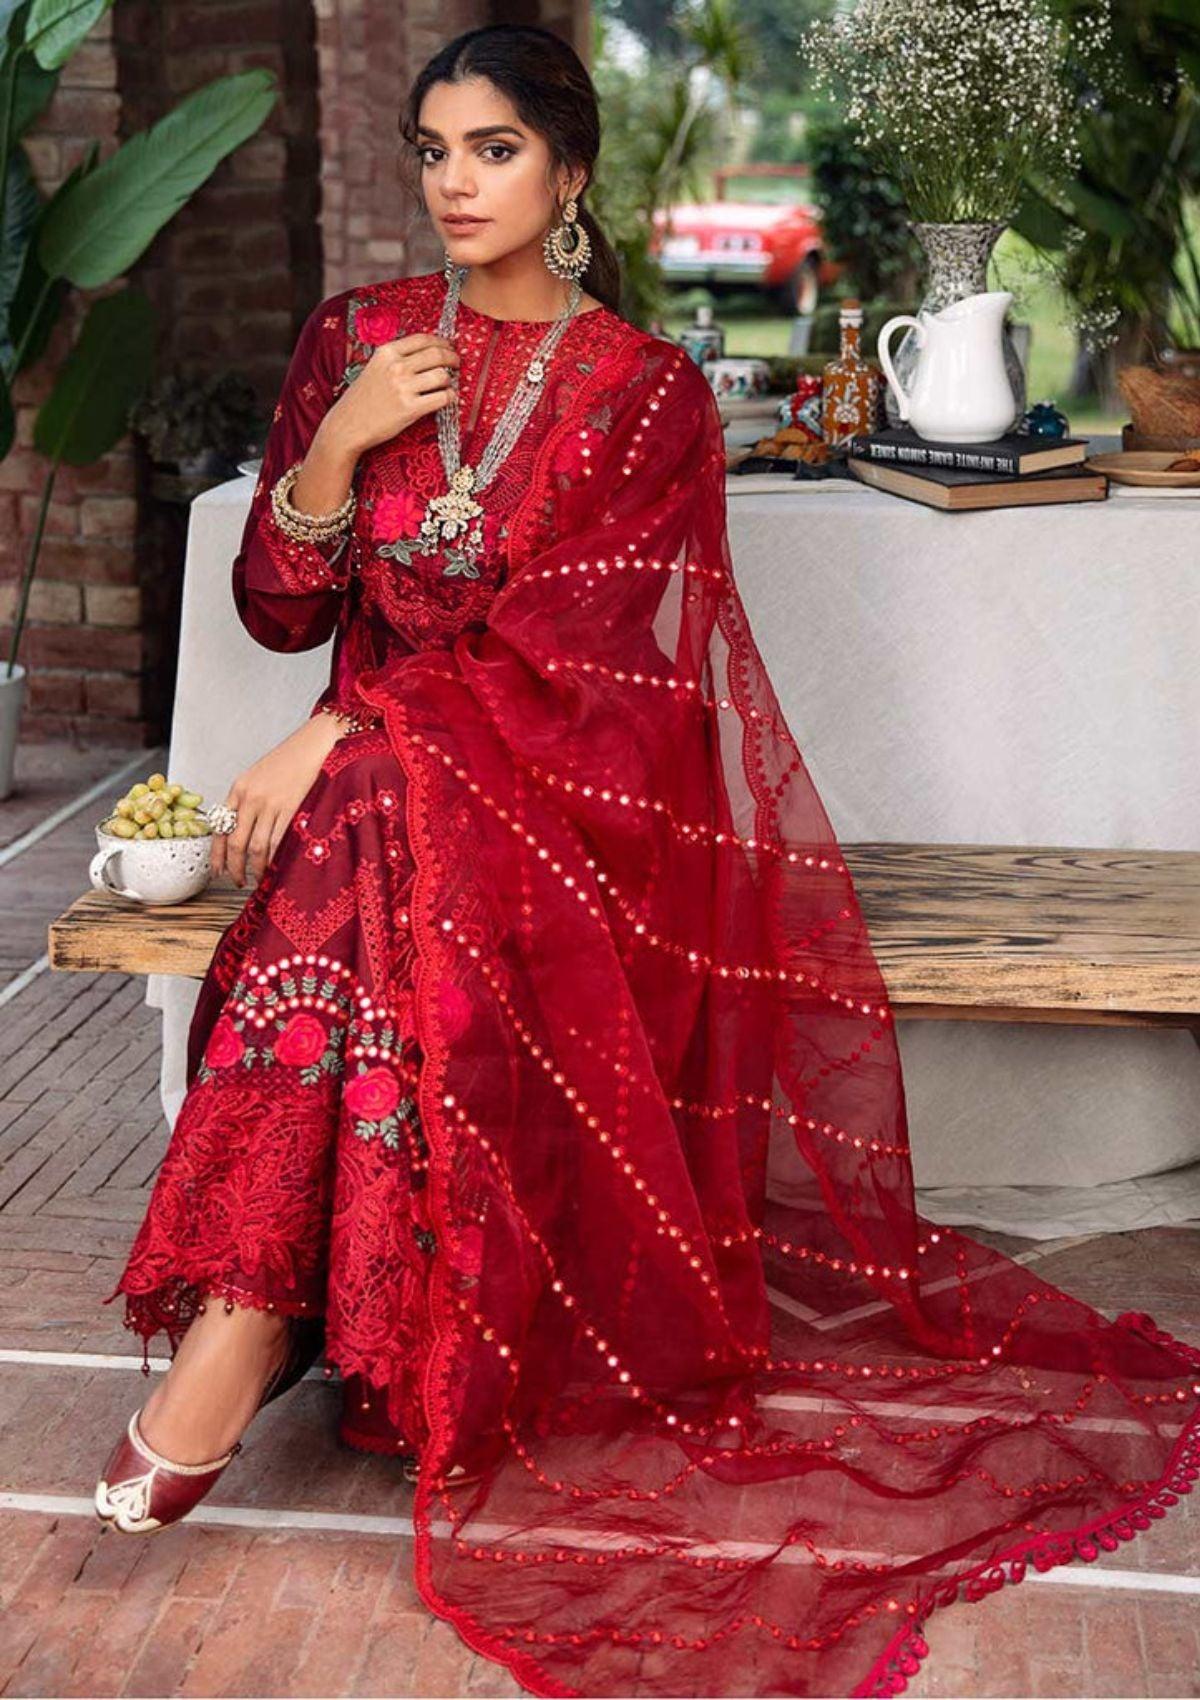 Rajbari-winter-Embroidered-&-Printed-Dress-is-available-at-Mohsin-Saeed-Fabrics-Online-Shopping--